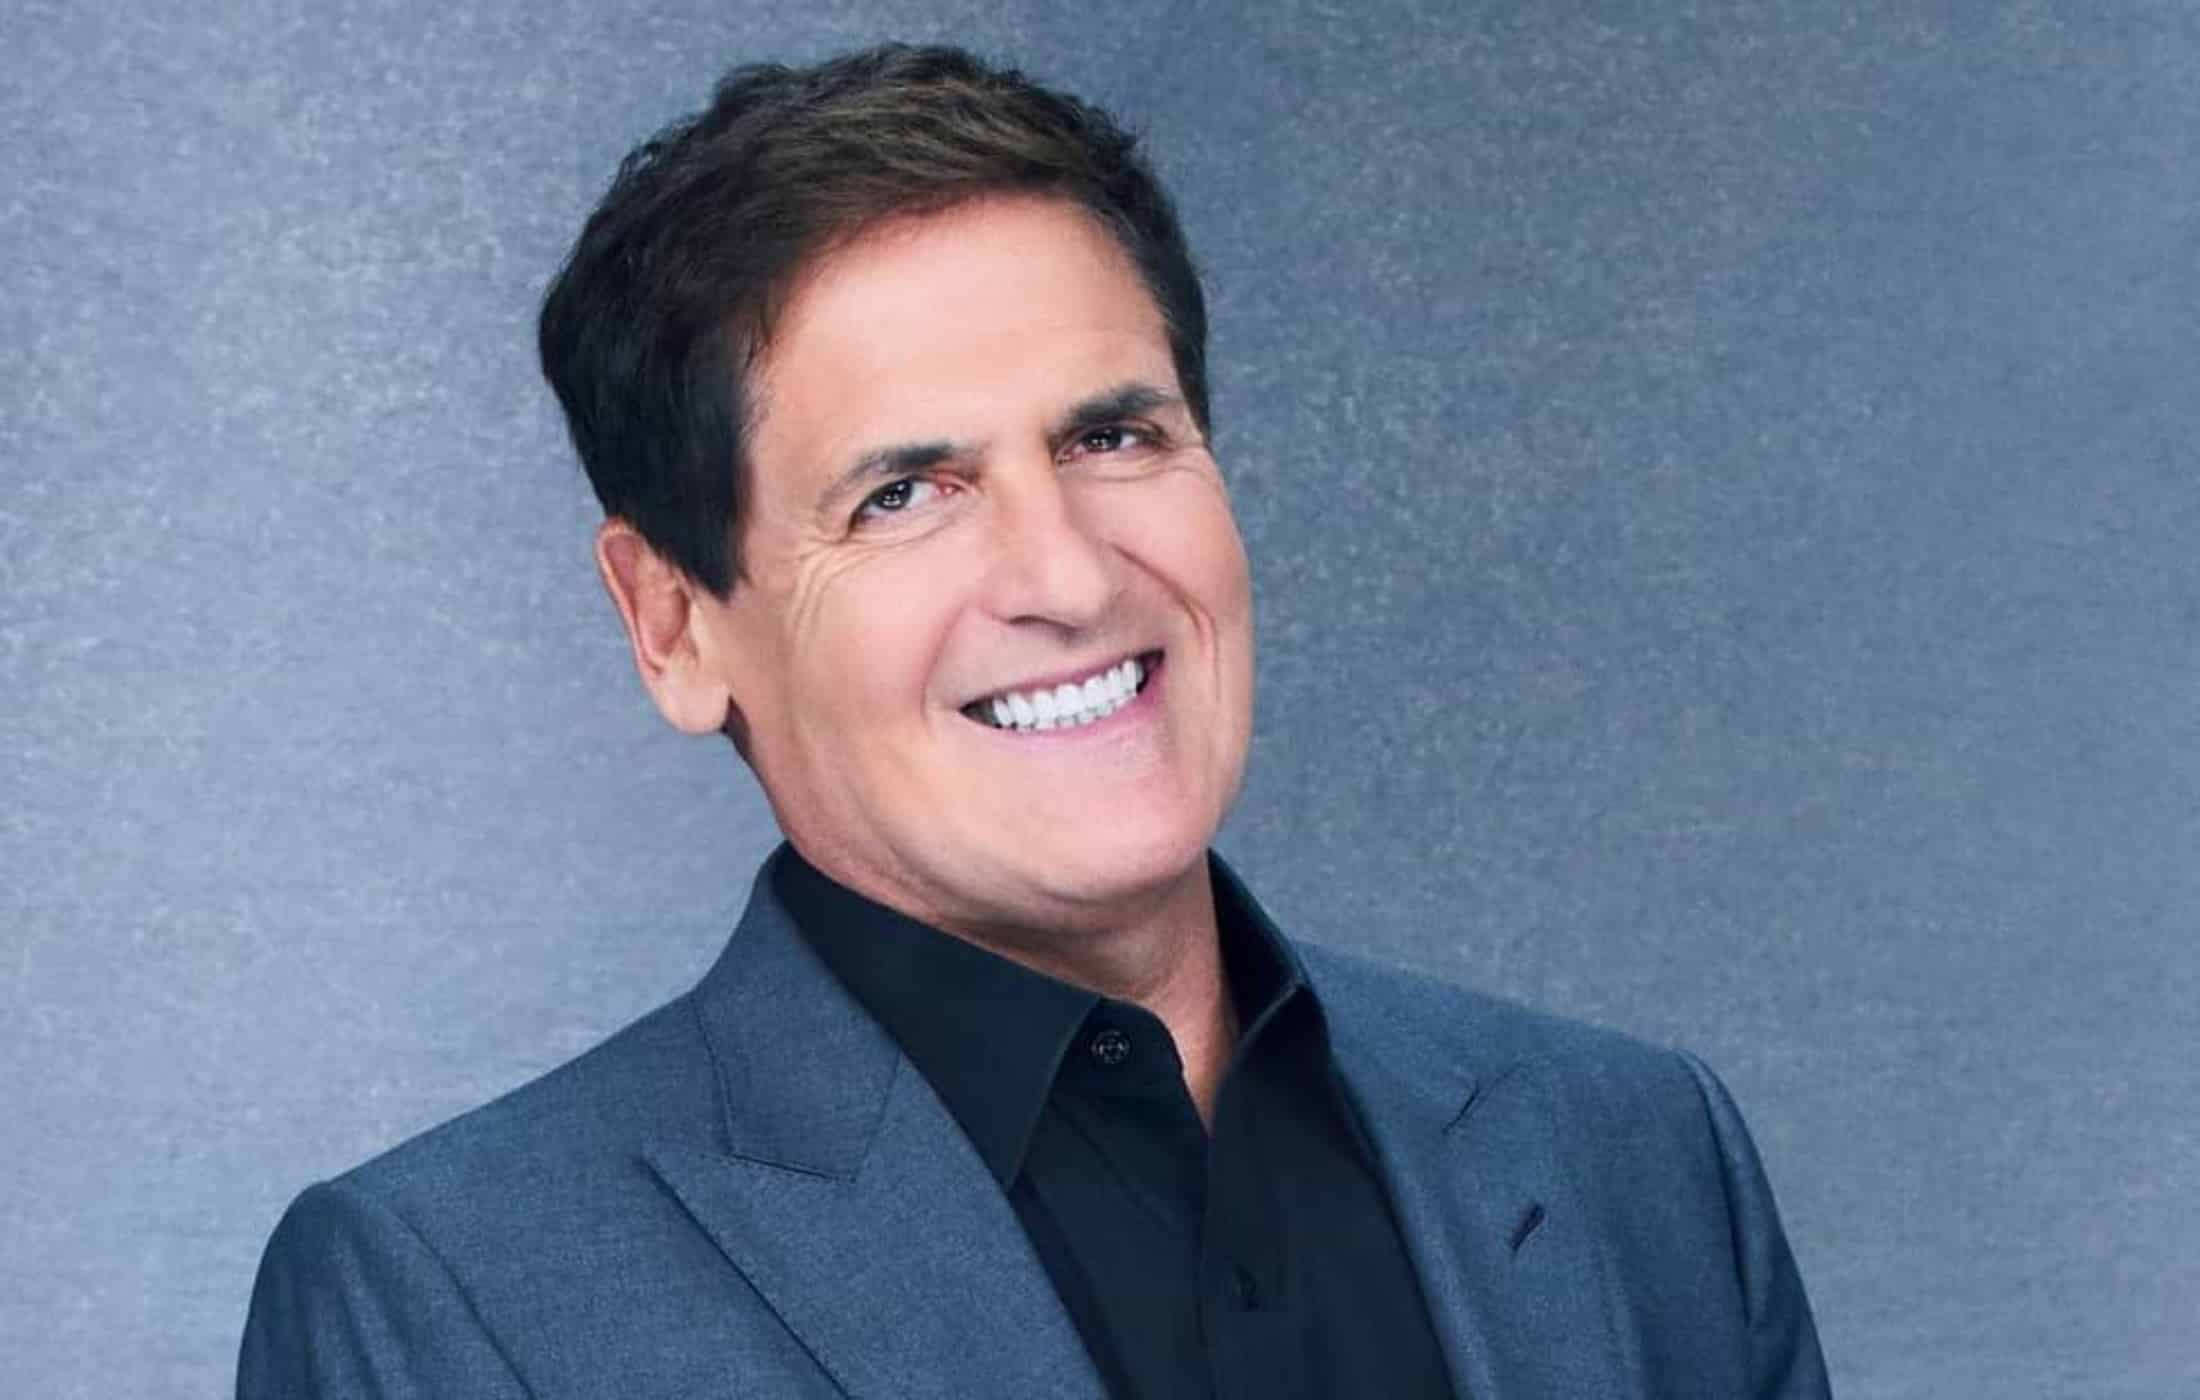 Mark Cuban net worth, age, height, wiki, family, biography and latest